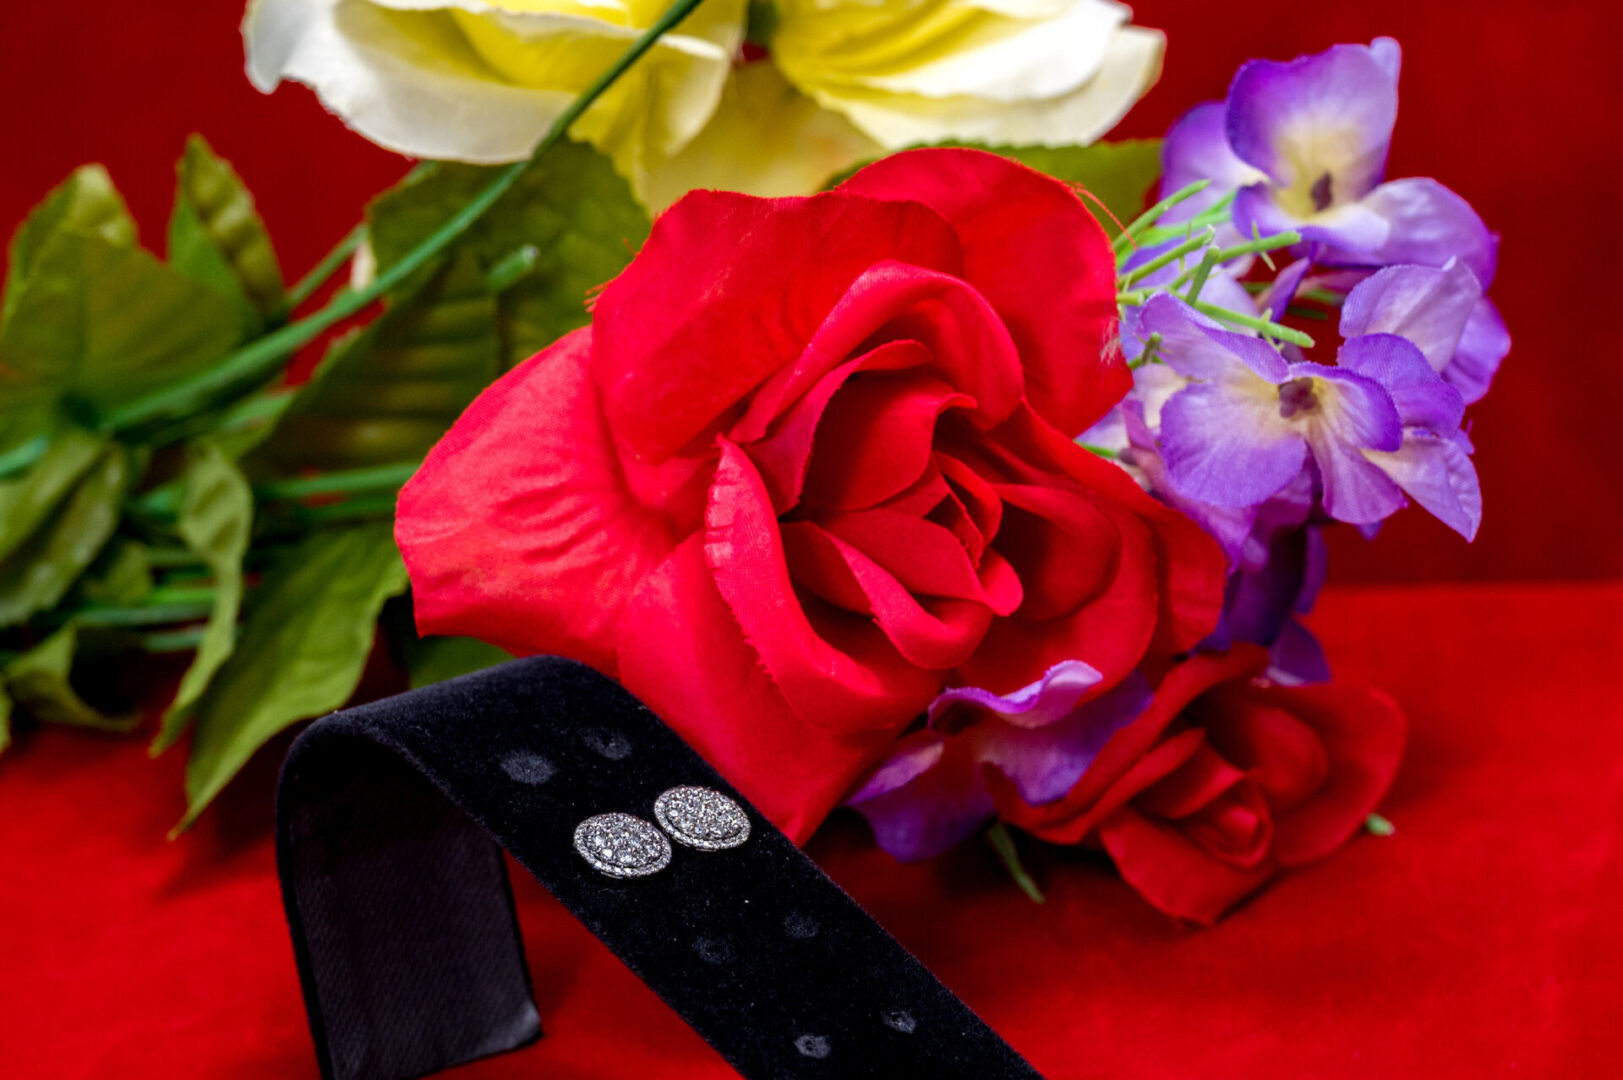 A red rose and some purple flowers on a table.